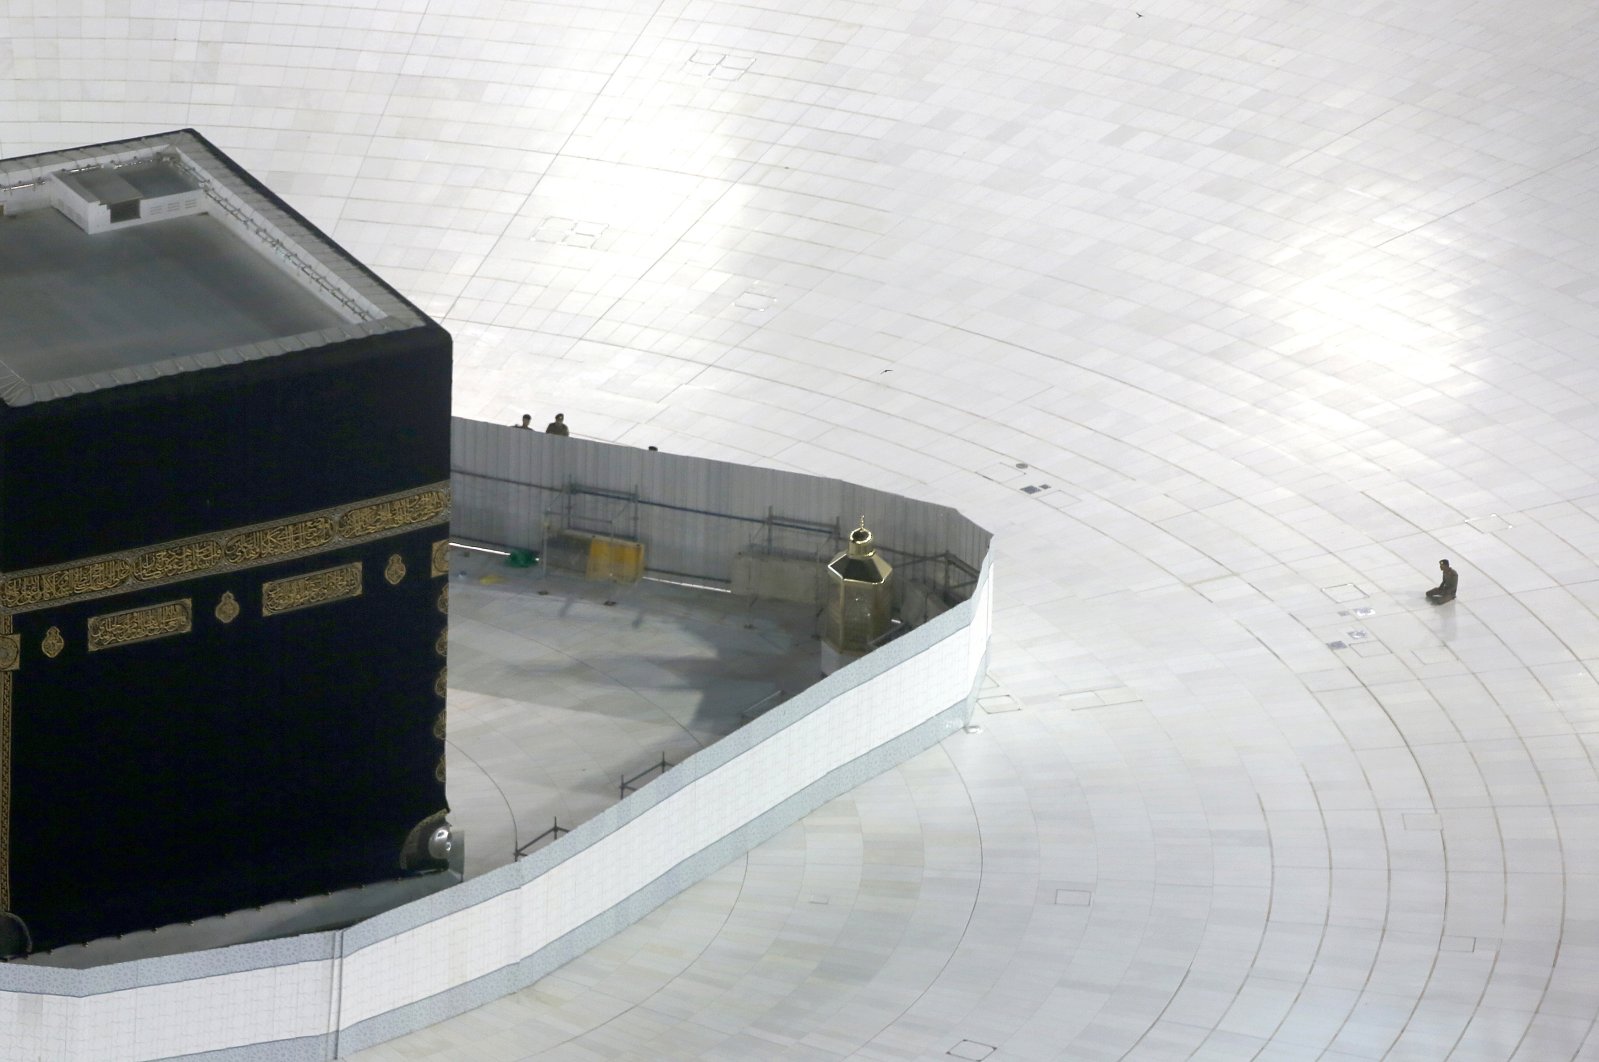 A Saudi policeman prays in front of the Kaaba, the cubic building at the Grand Mosque, in the Muslim holy city of Mecca, Saudi Arabia, March 7, 2020. (AP Photo)